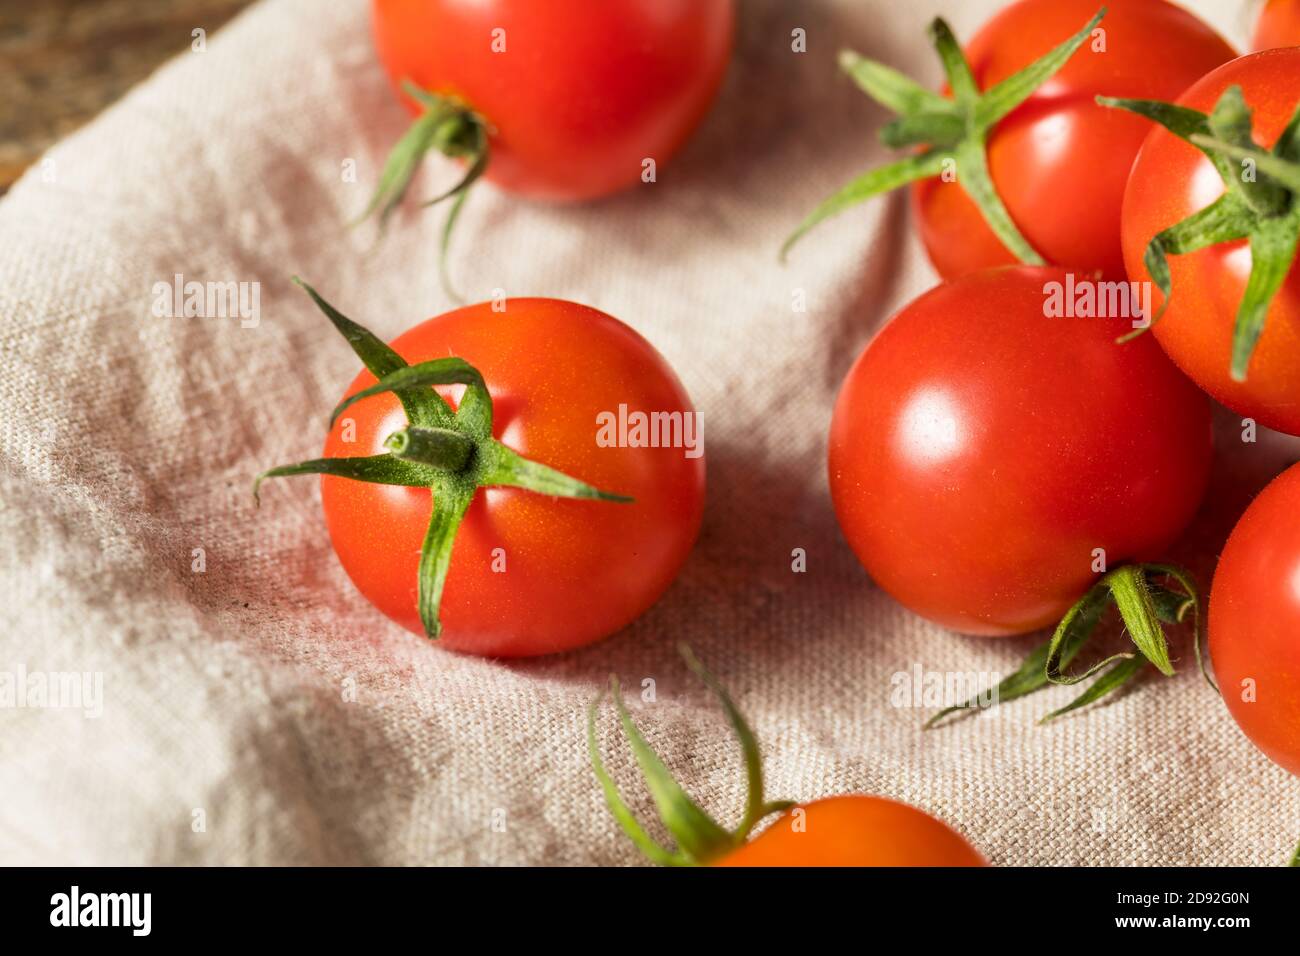 Raw Red Organic Cherry Tomatoes Ready to Eat Stock Photo